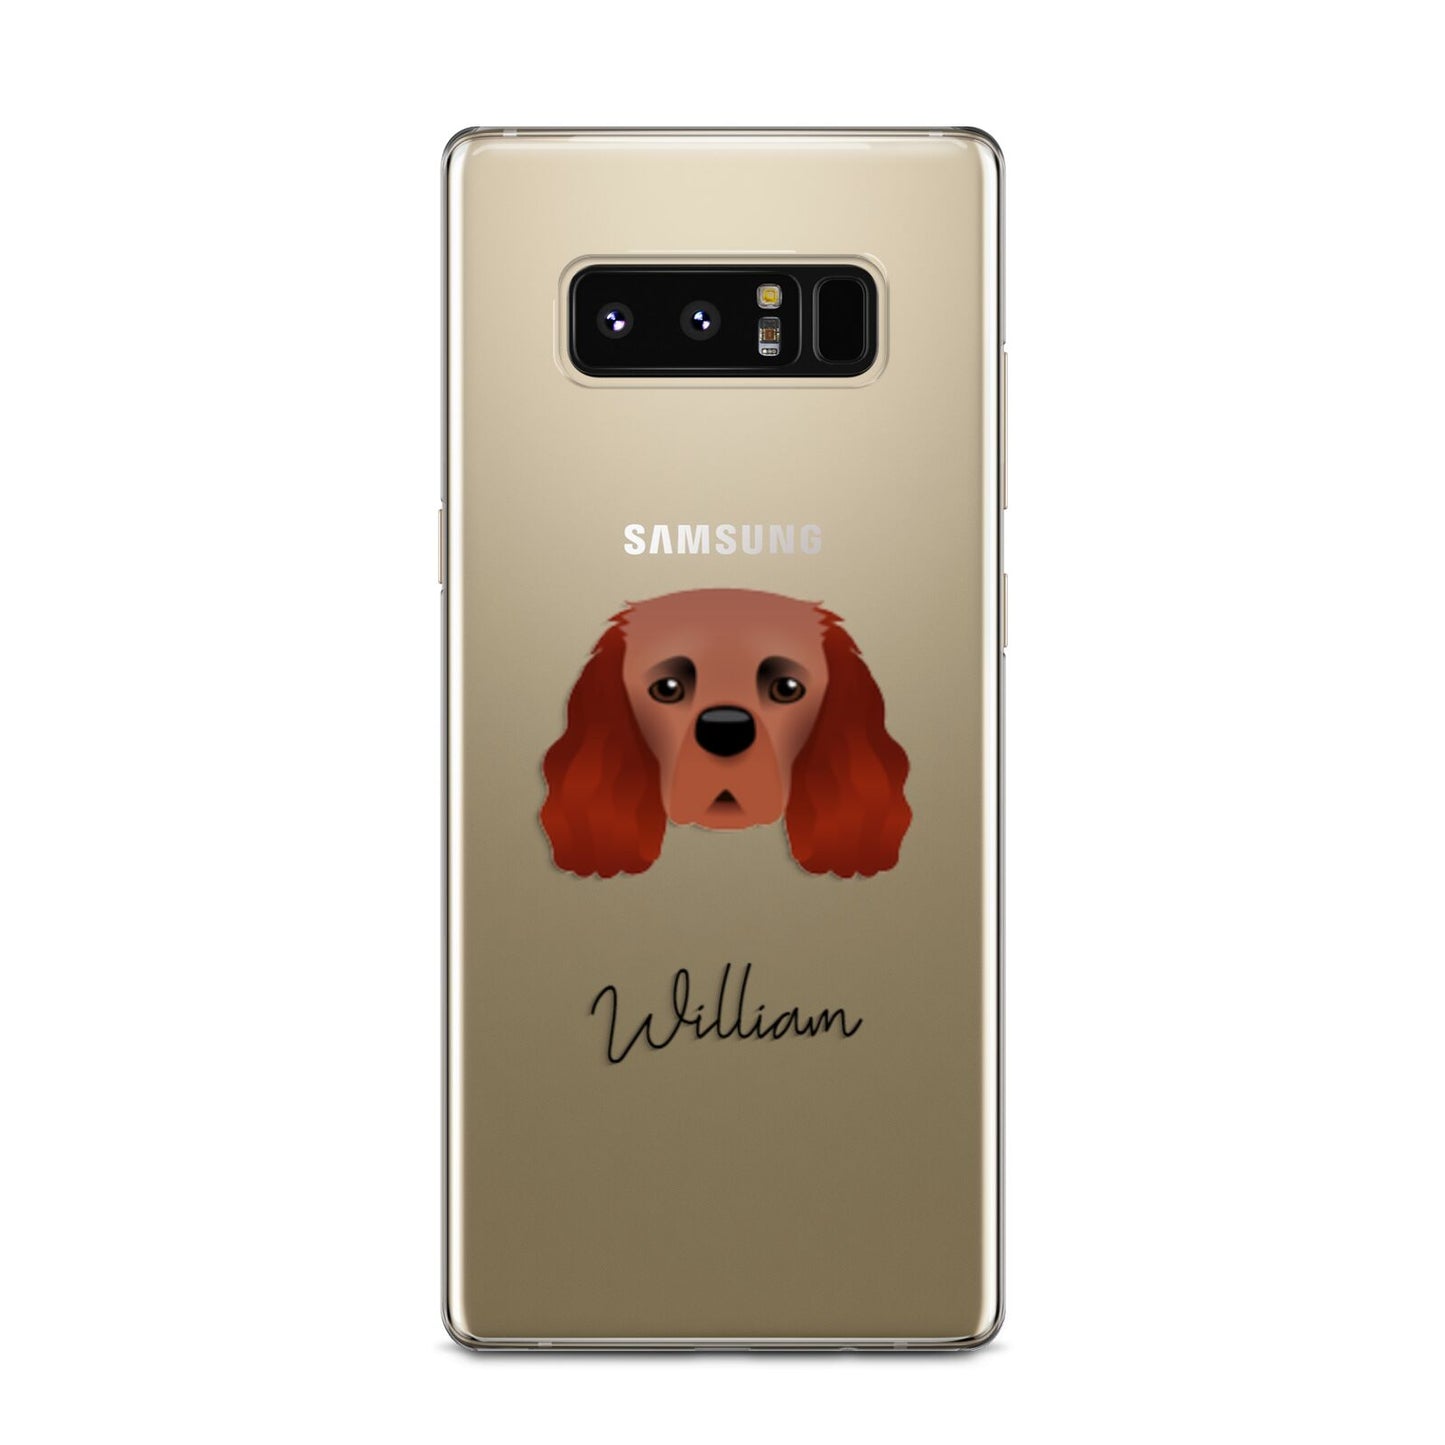 Cavalier King Charles Spaniel Personalised Samsung Galaxy Note 8 Case